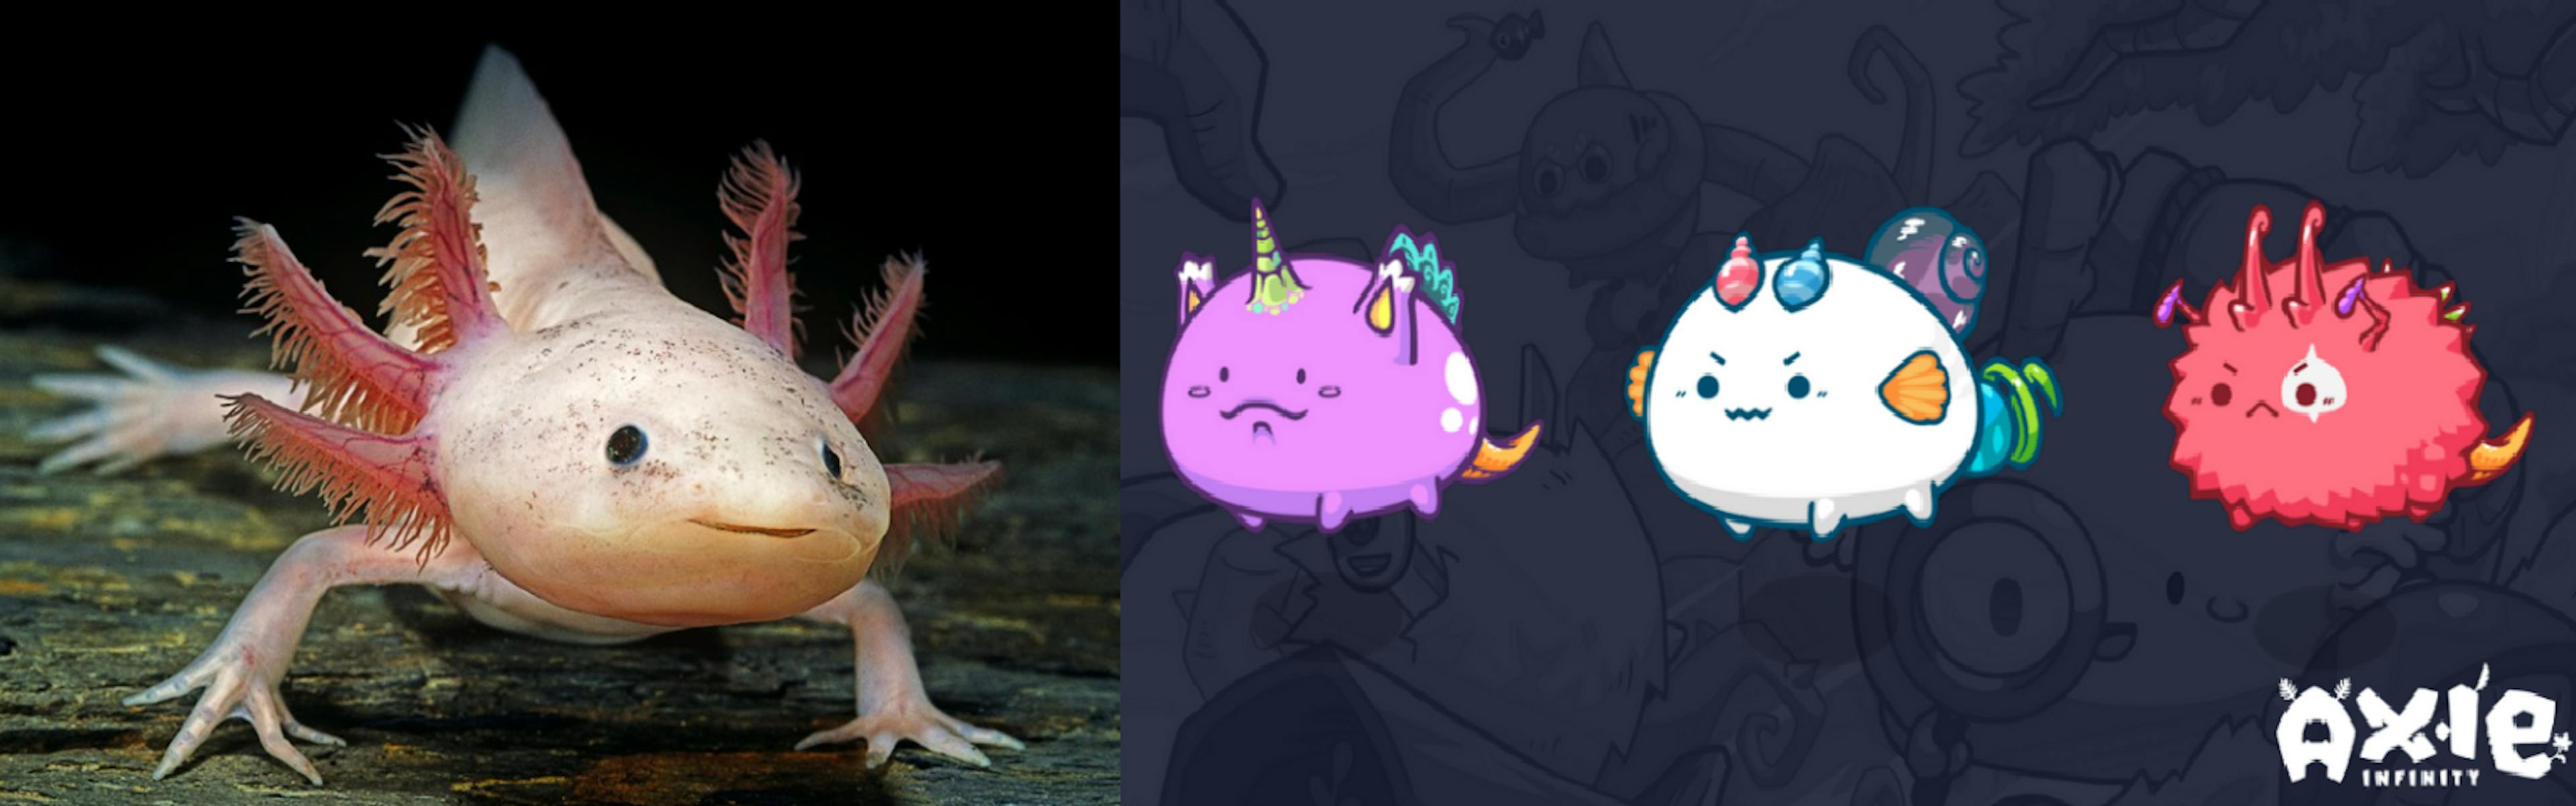 Axolot [left] and the Axies [right] they inspired